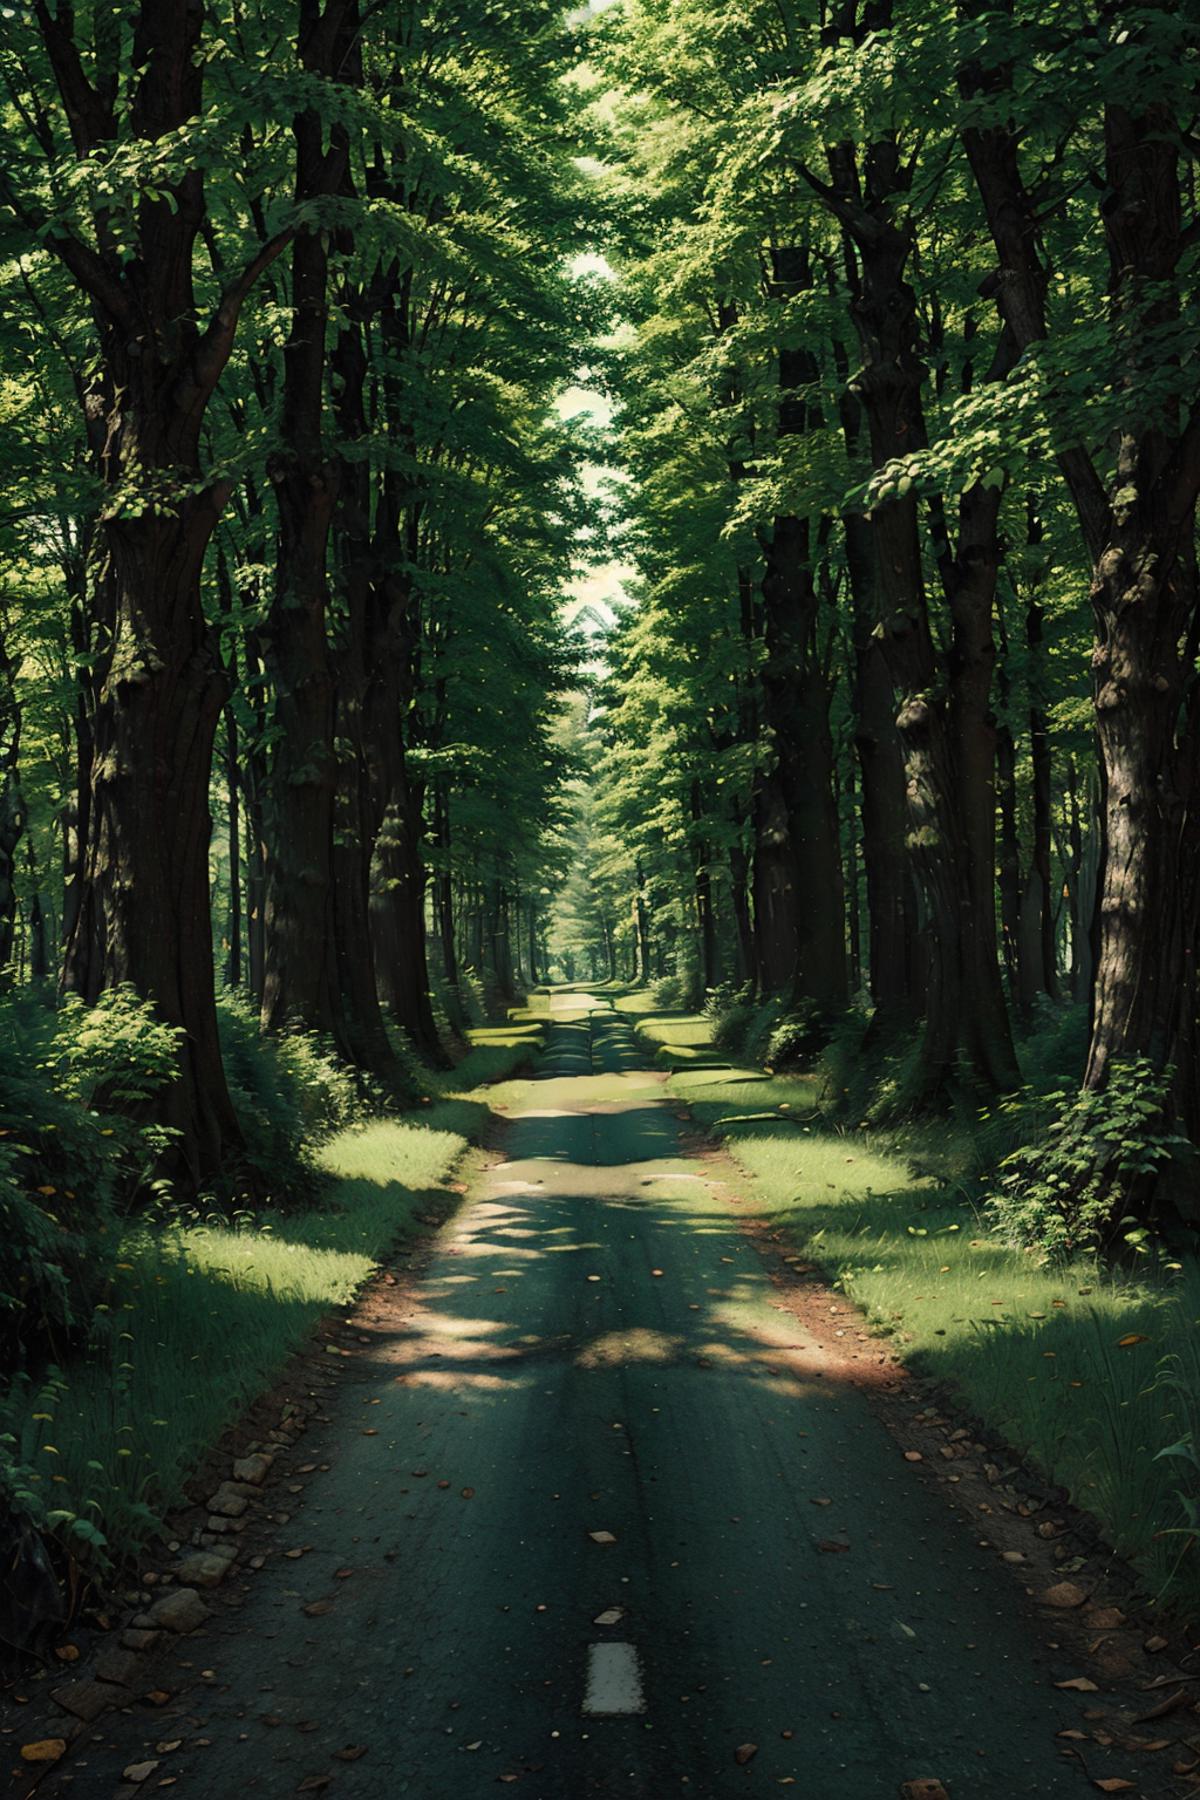 A tree-lined road in a lush green forest.